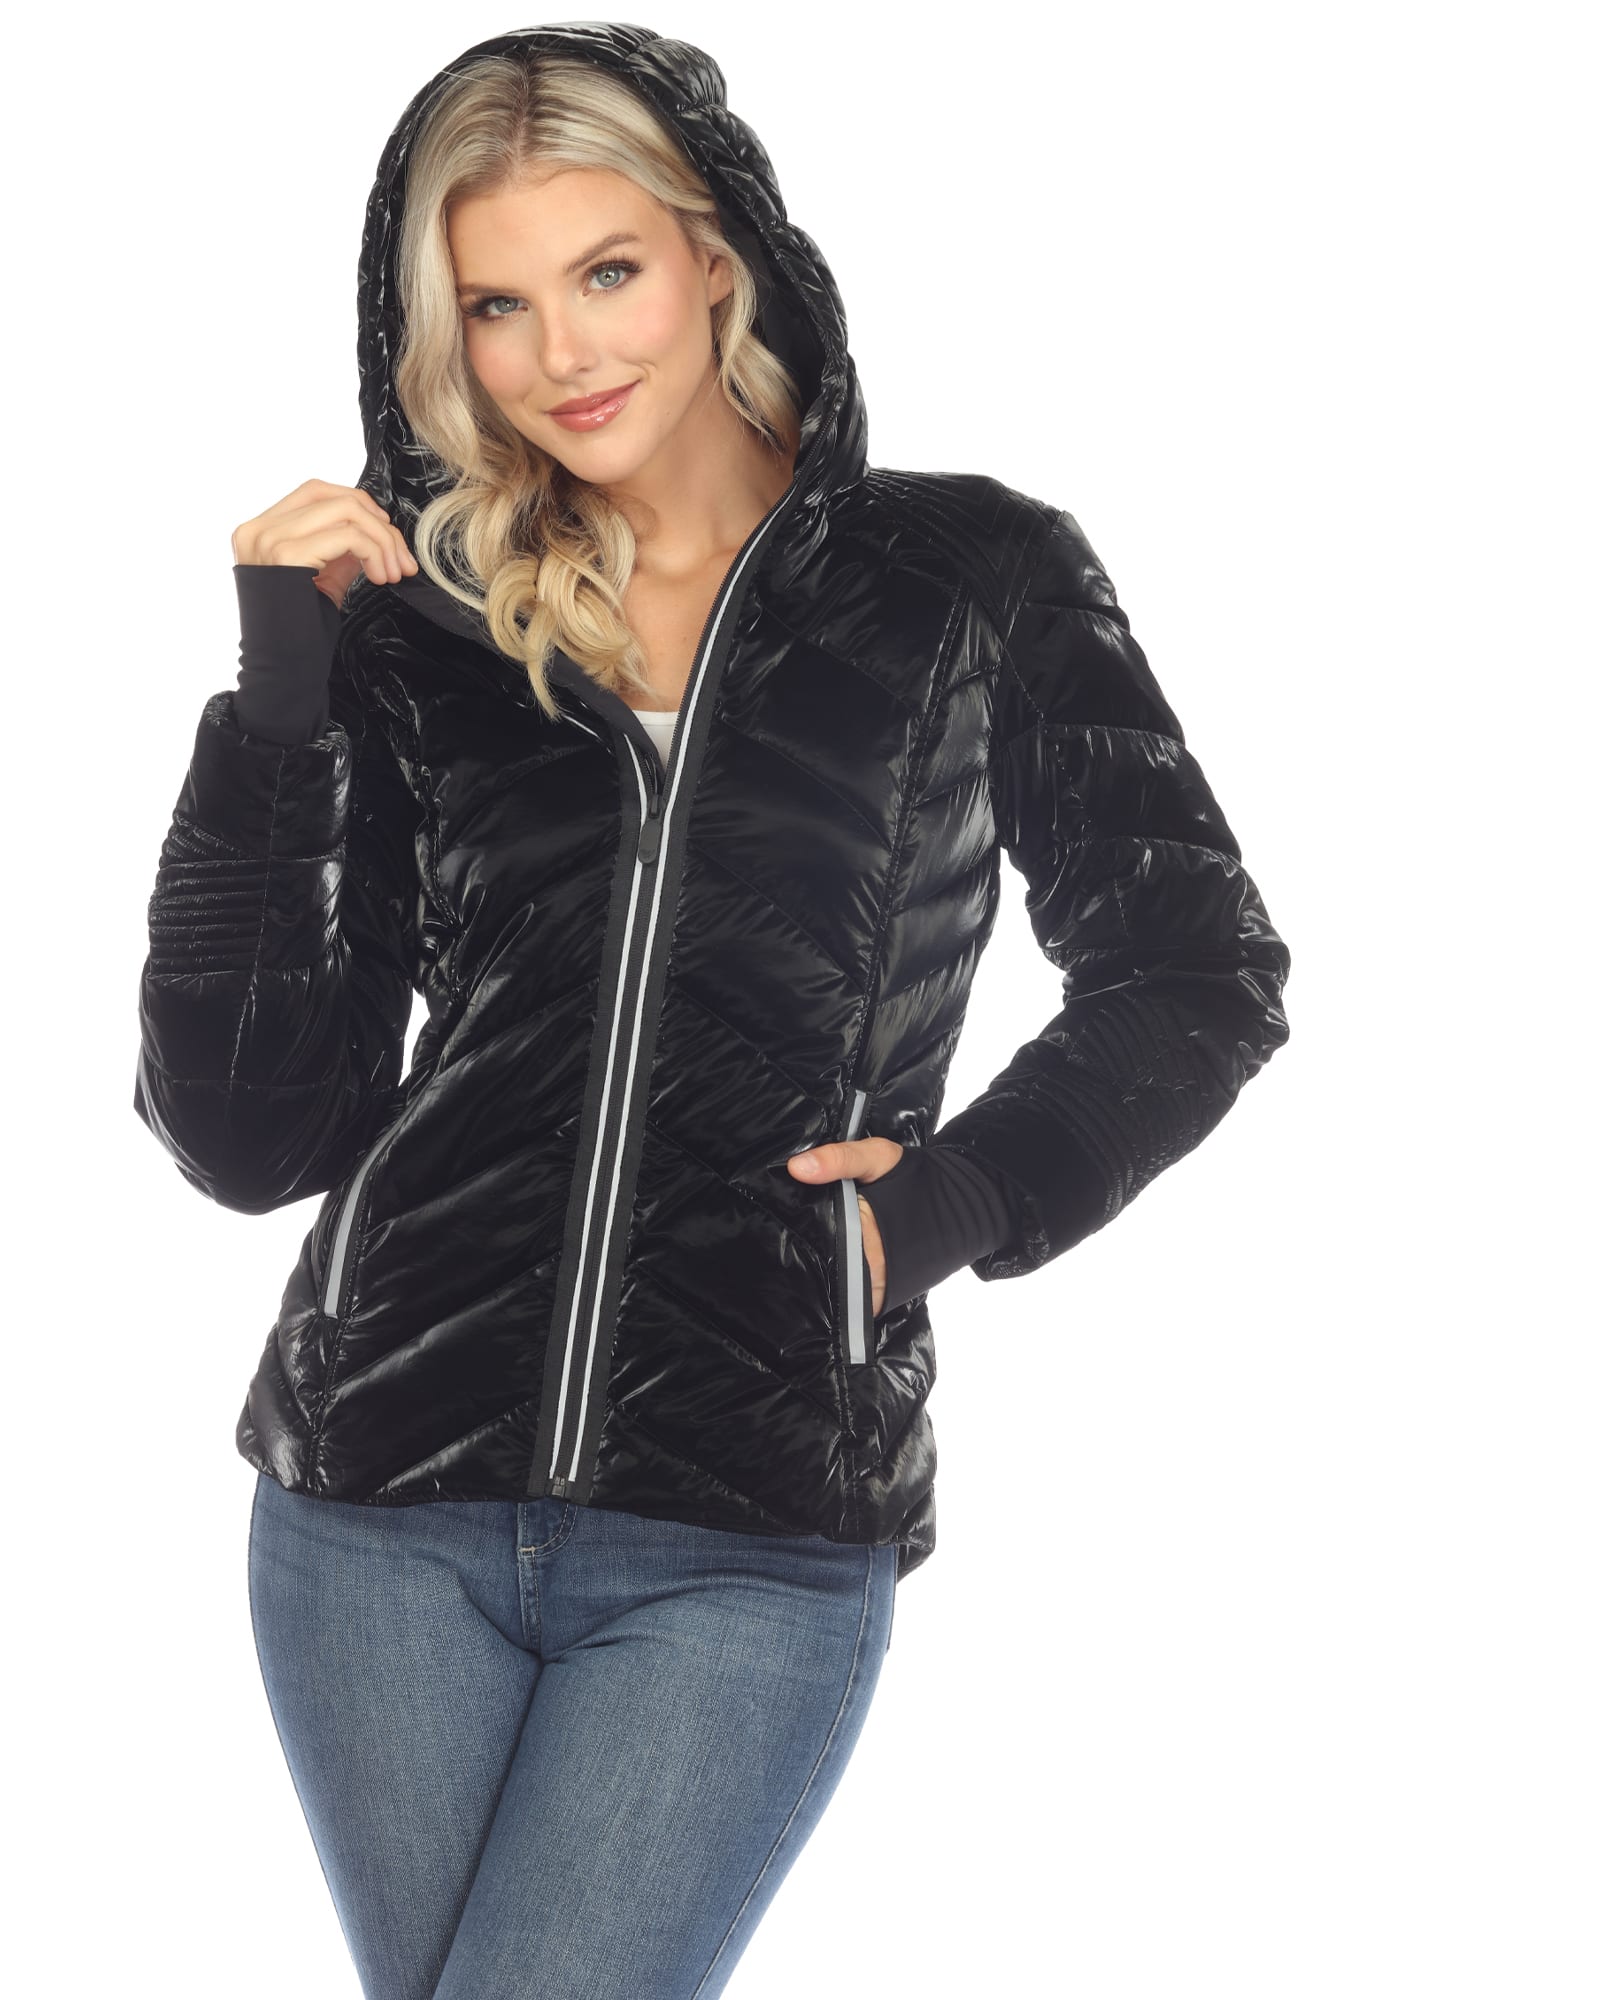 Women's Midweight Quilted Contrast With Thumbholes Hooded Jacket | Black